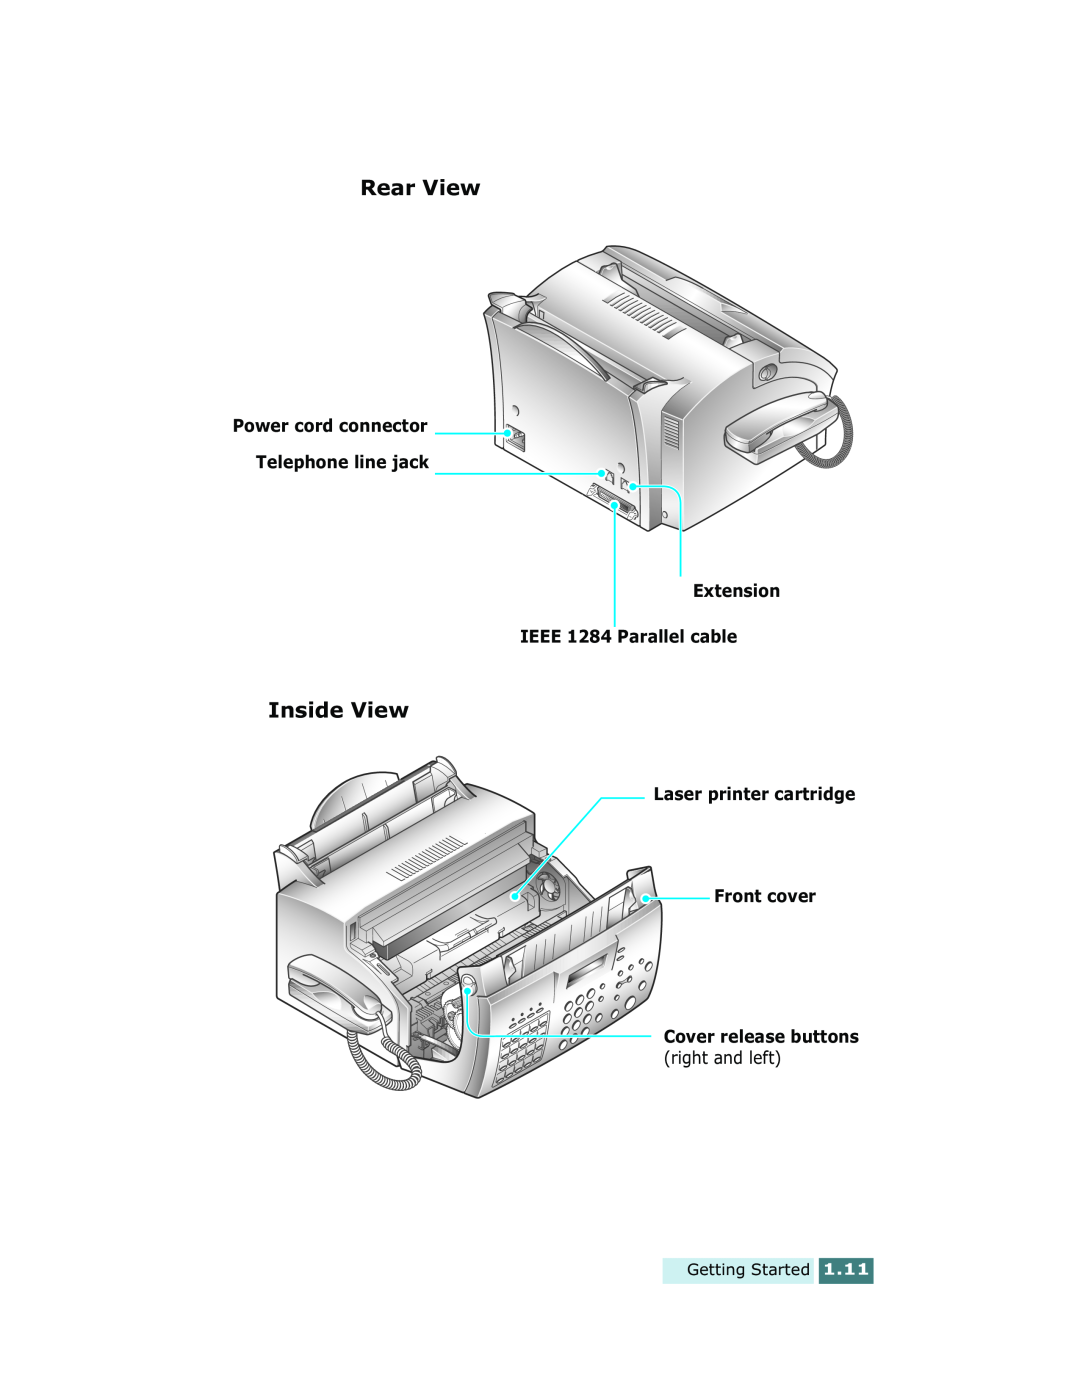 Xerox Pro 580 manual Rear View, Inside View, Power cord connector, Telephone line jack Extension IEEE 1284 Parallel cable 